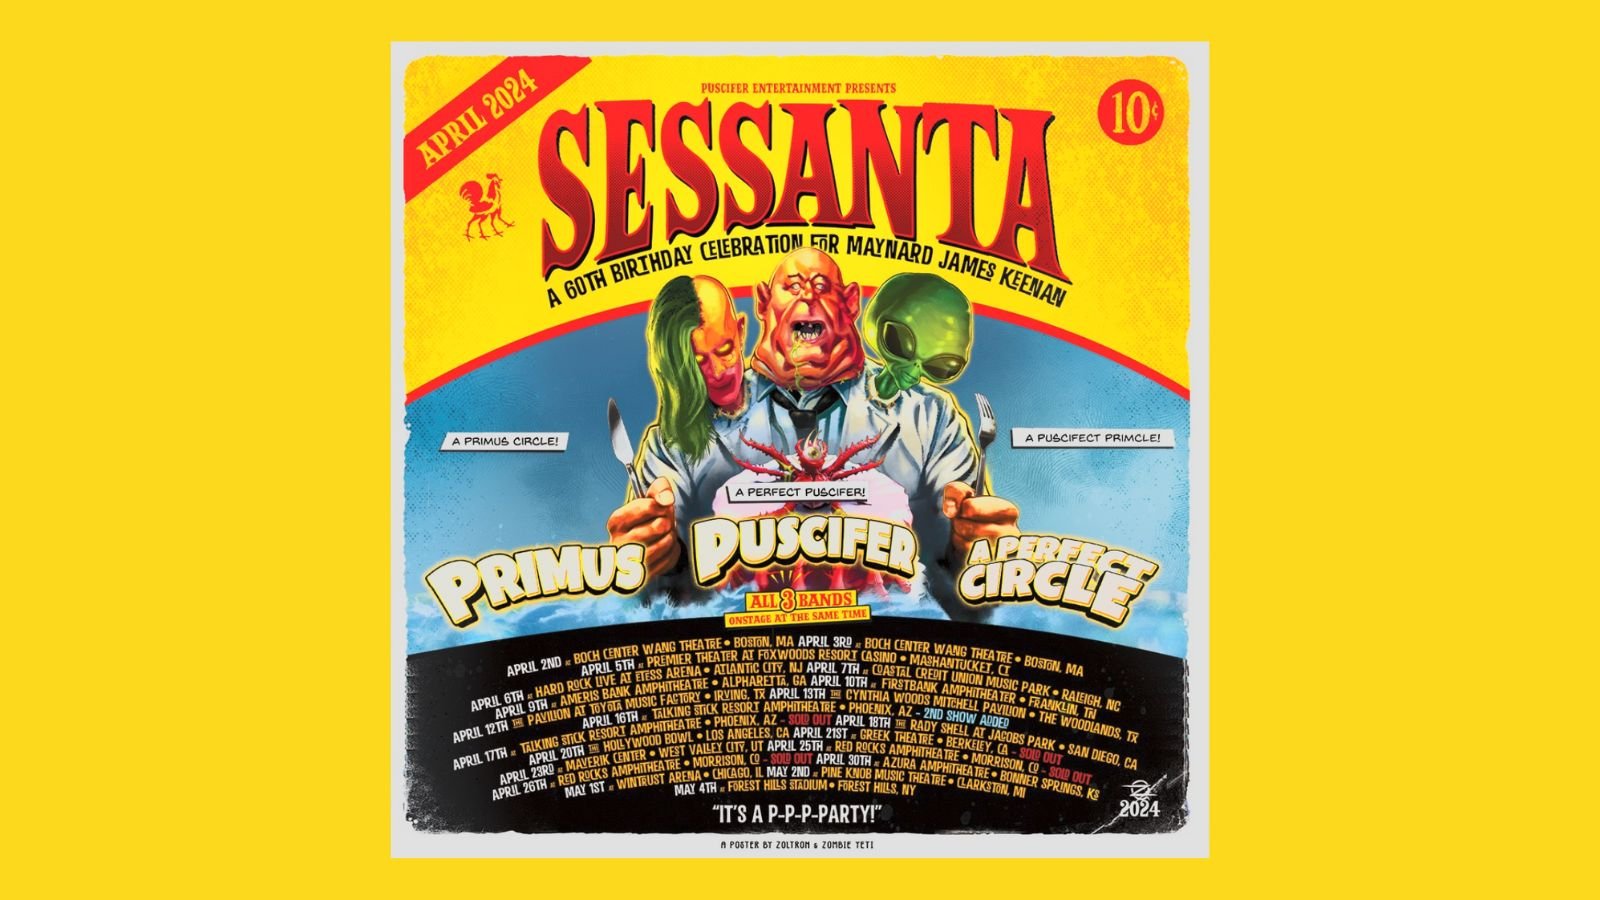 A Perfect Circle, Primus, and Puscifer